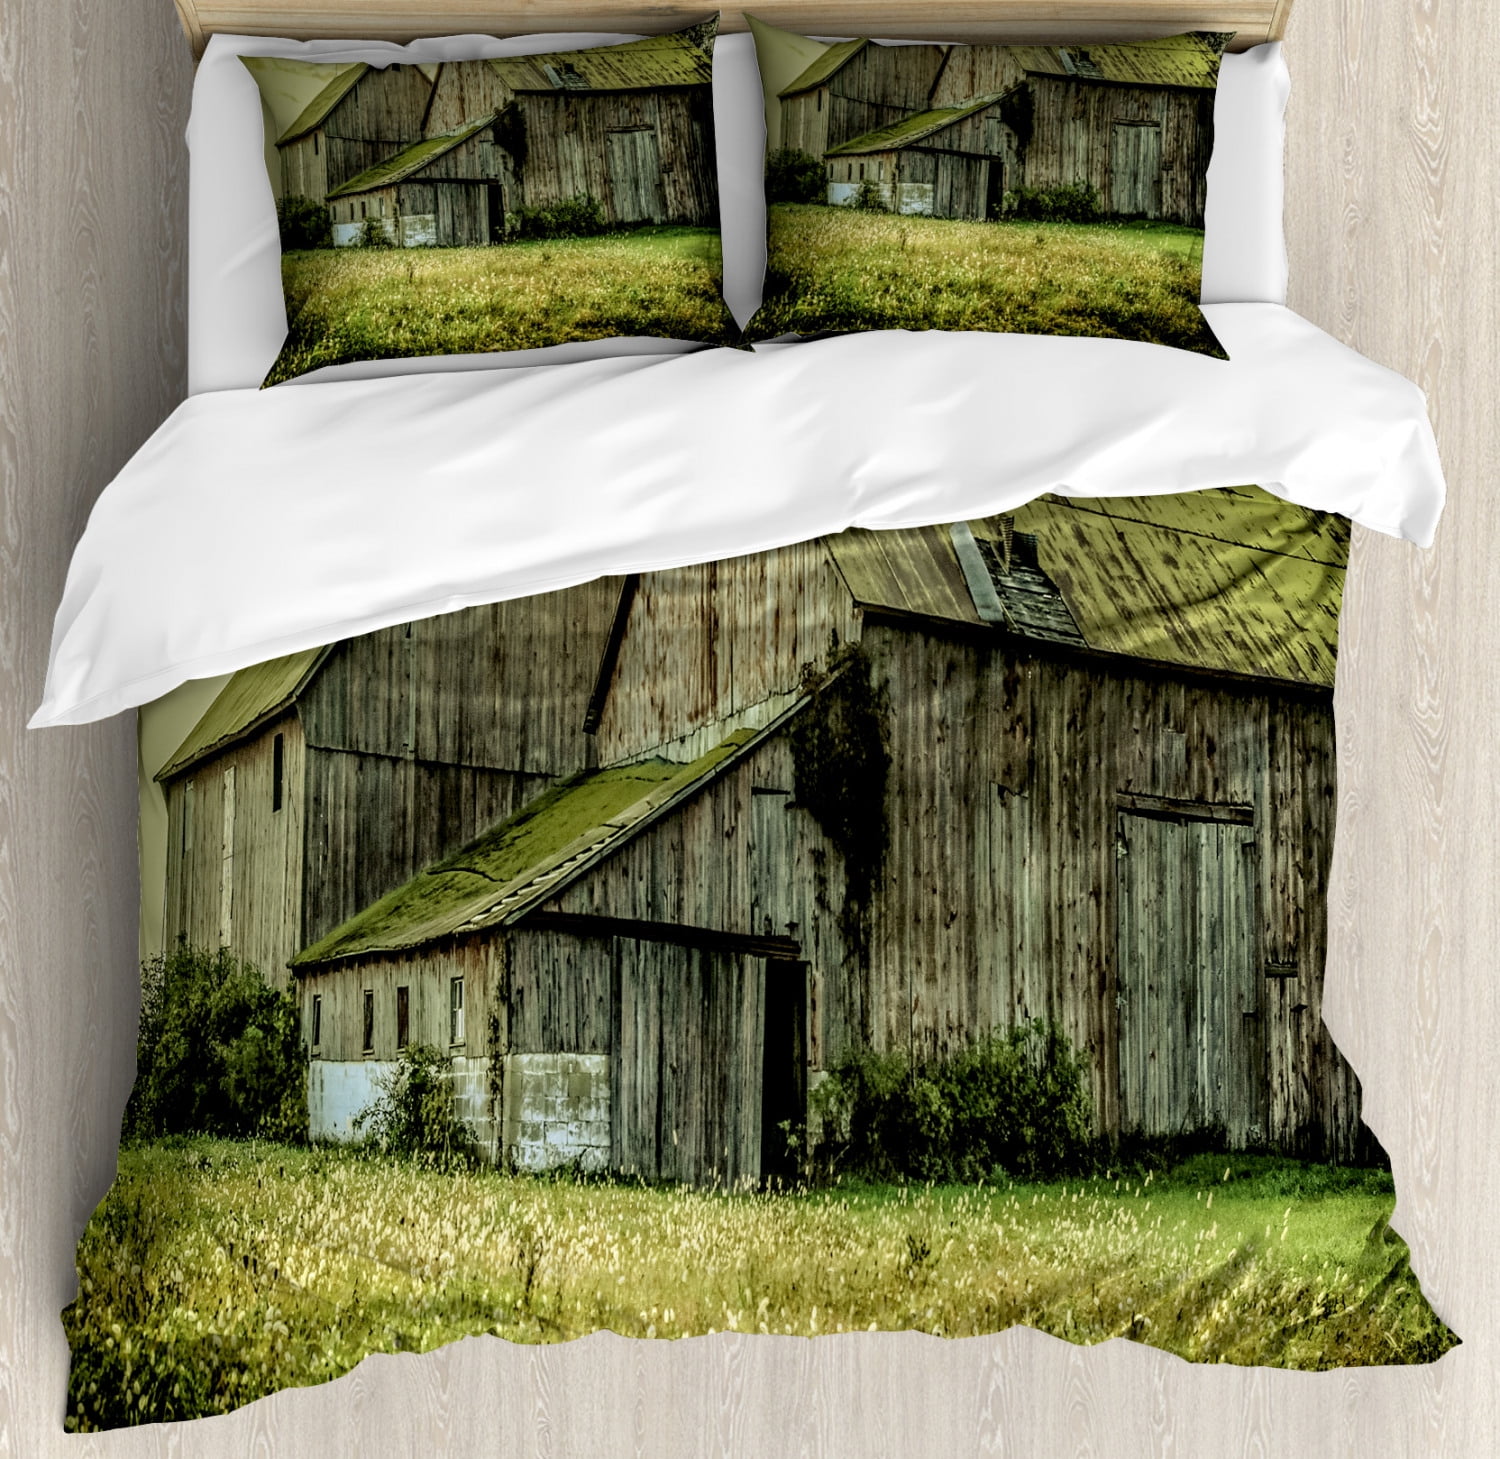 Country Duvet Cover Set Farmer Field Barn Warehouse Midwest